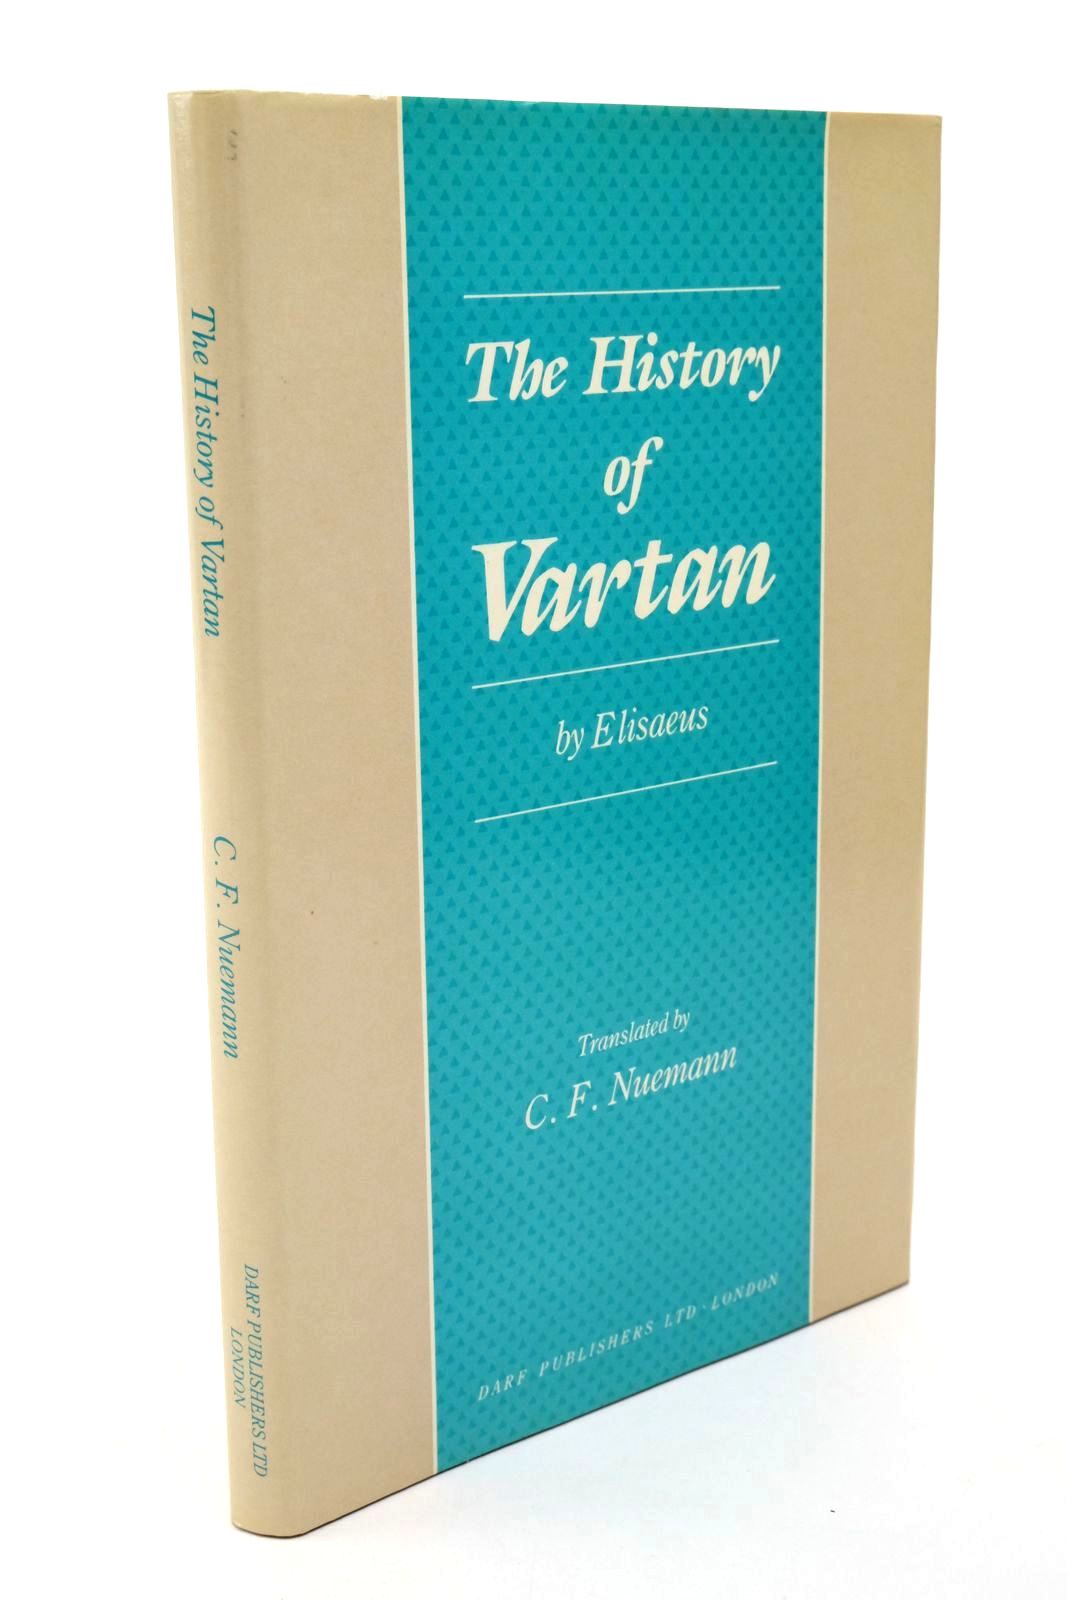 Photo of THE HISTORY OF VARTAN, AND OF THE BATTLE OF THE ARMENIANS written by Elisaeus,  Nuemann, C.F. published by Darf Publishers Ltd (STOCK CODE: 1322539)  for sale by Stella & Rose's Books